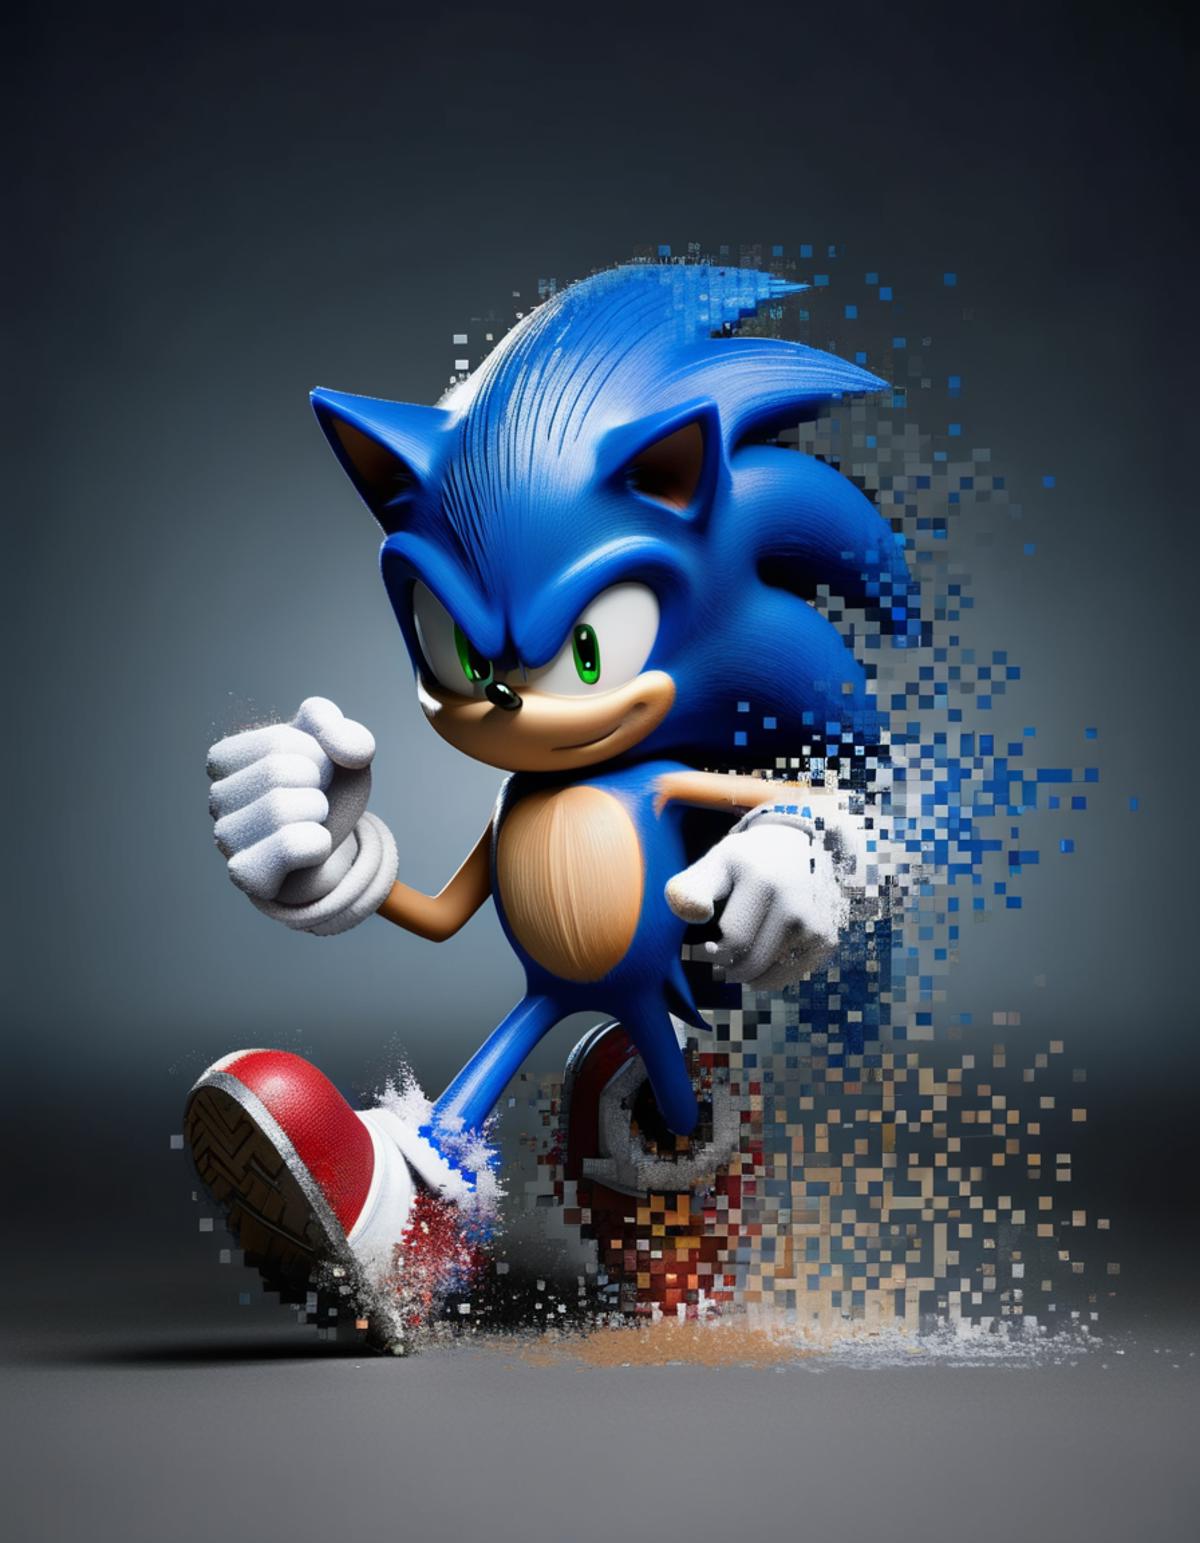 A 3D rendering of Sonic the Hedgehog running in motion.